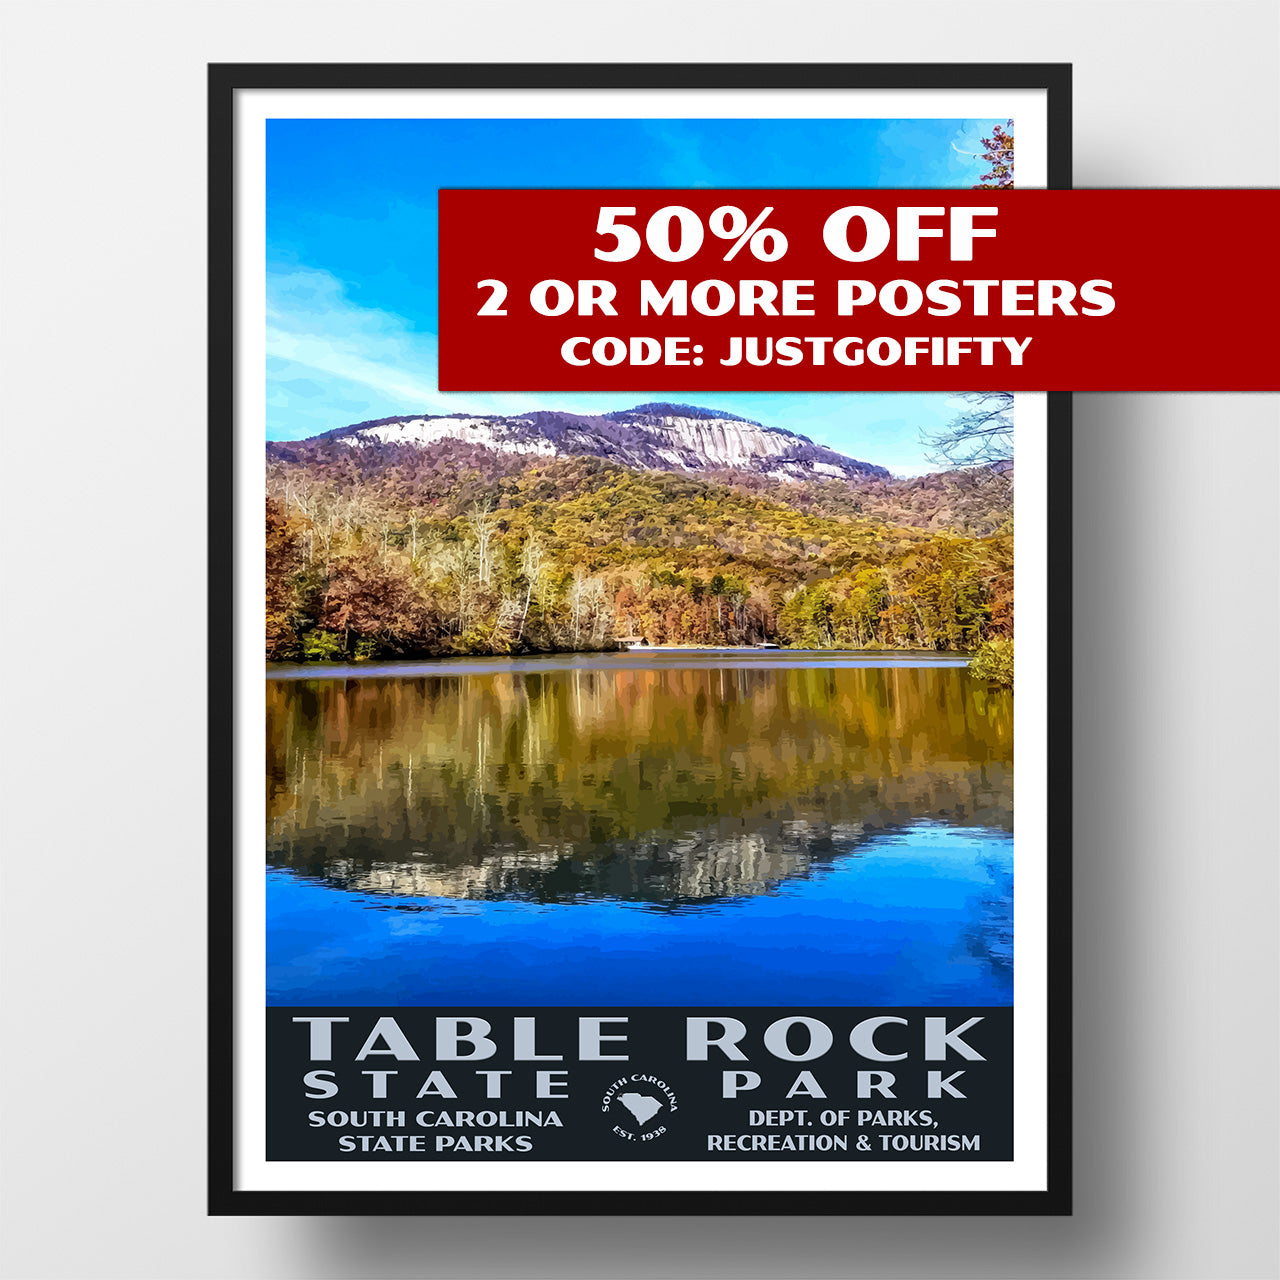 Table Rock State Park poster